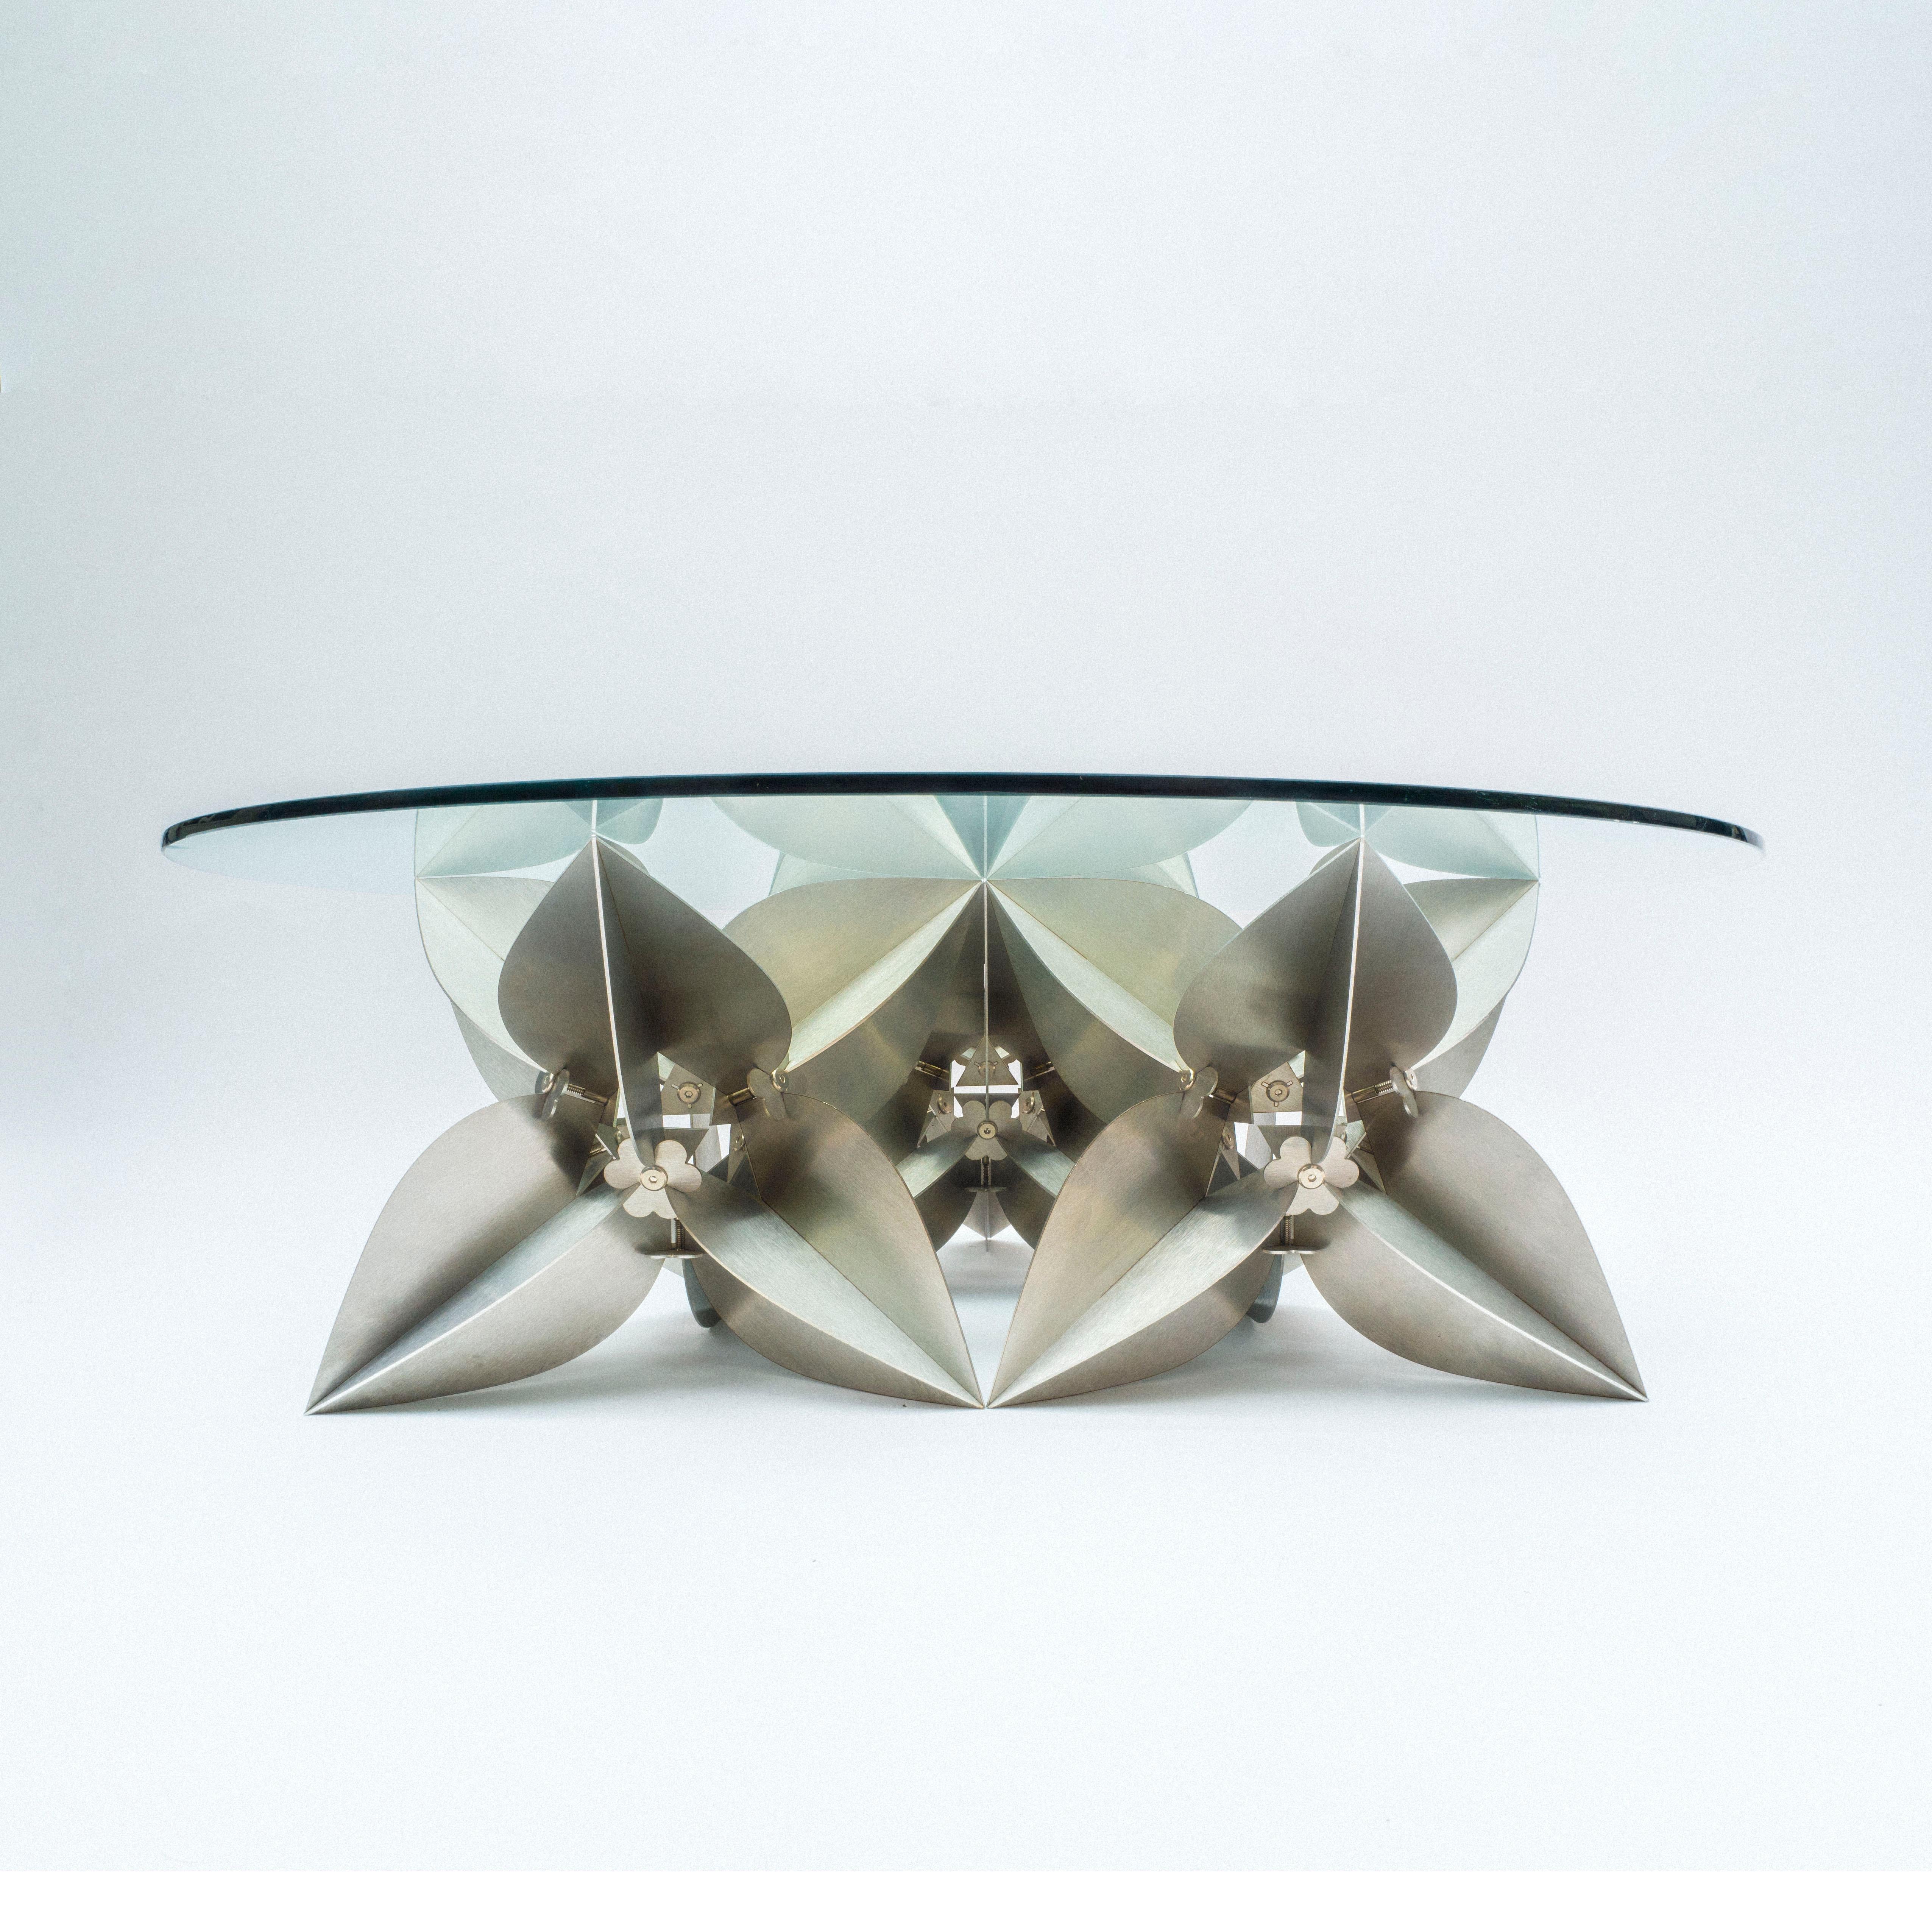 Bugambilia, Multifunctional Geometric Stainless Steel Modular Sculpture For Sale 2